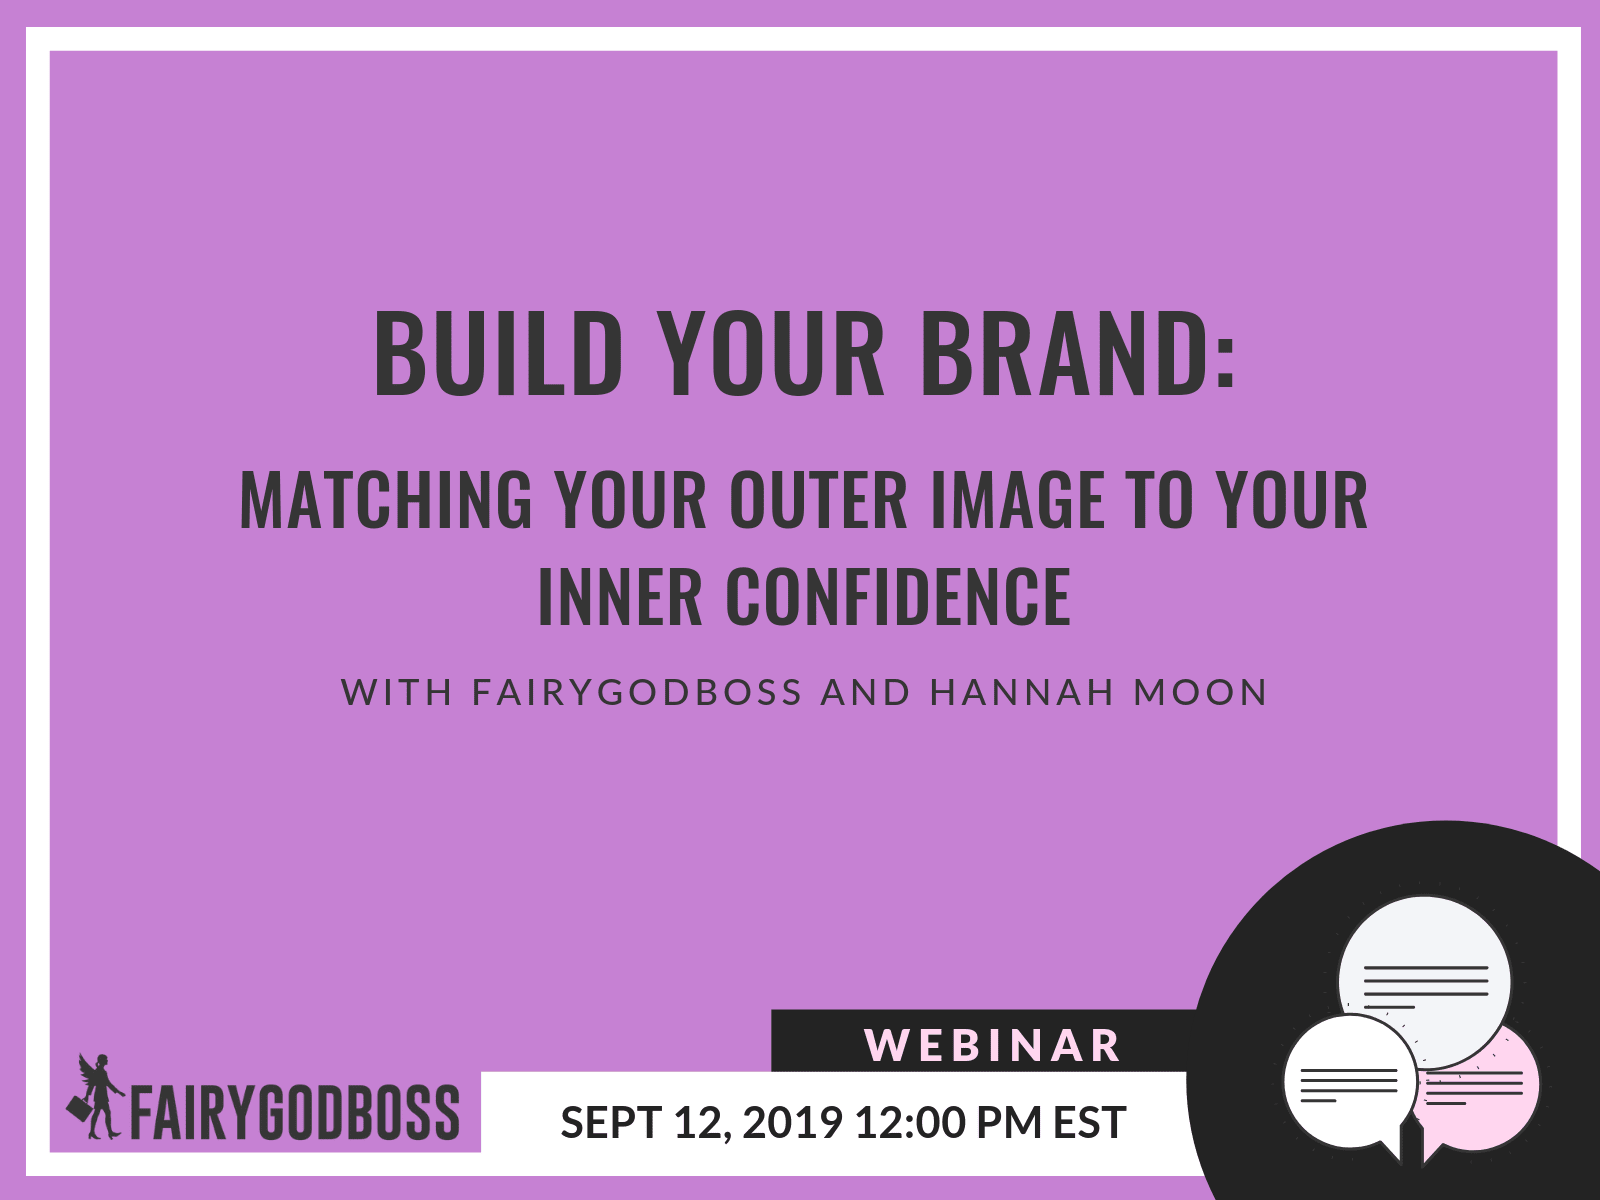  Build Your Brand: Matching Your Outer Image to Your Inner Confidence